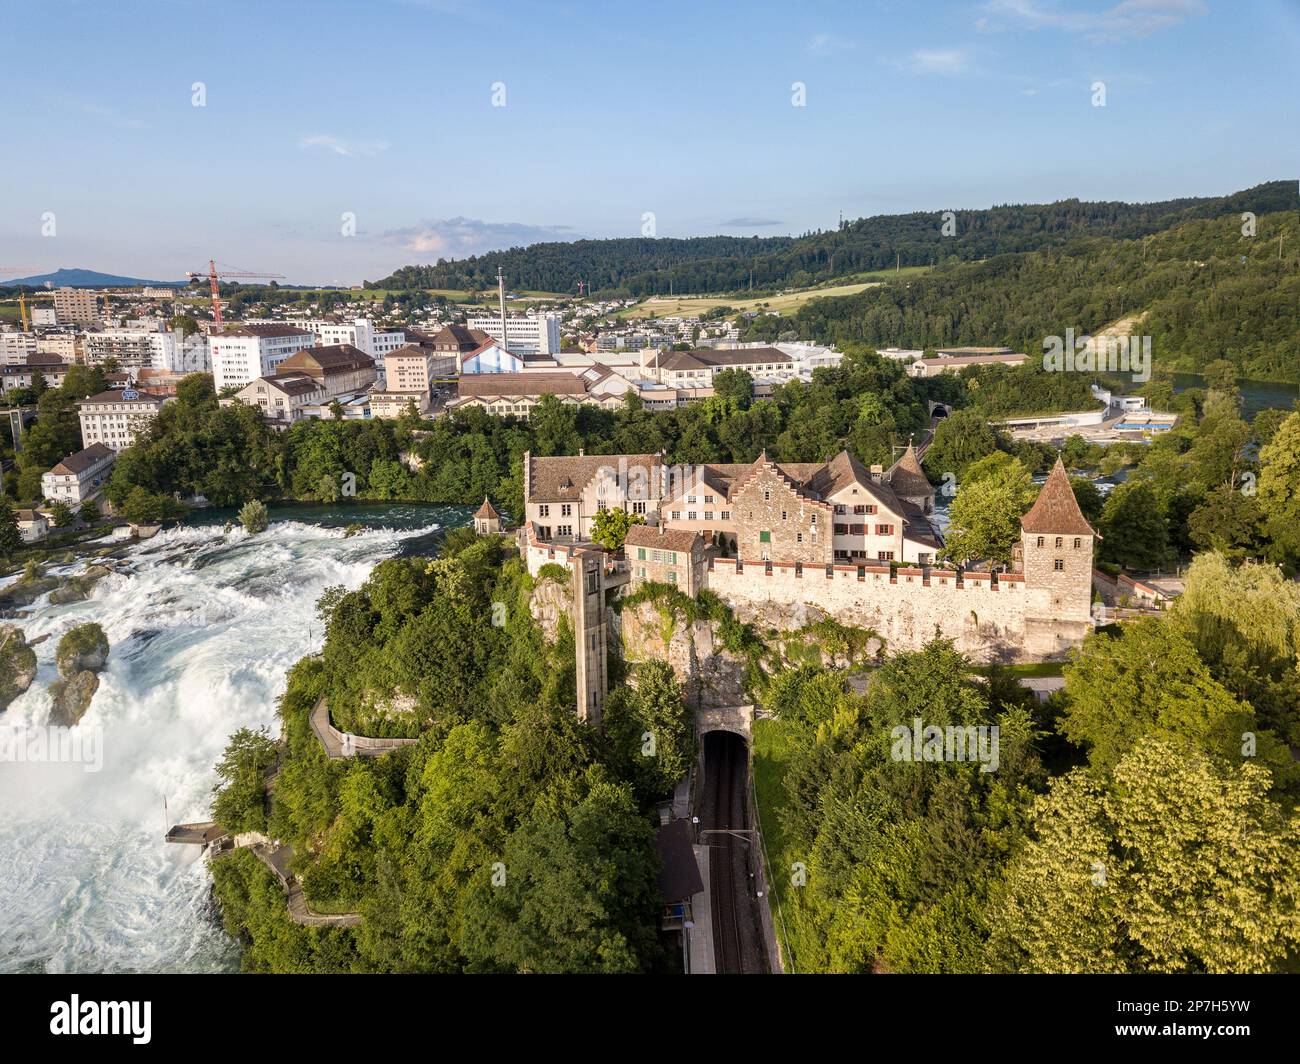 Laufen, Switzerland - 02 July, 201: Aerial image with drone over the Rhine Falls and Castle Laufen in Switzerland - the largest waterfall in Europe Stock Photo